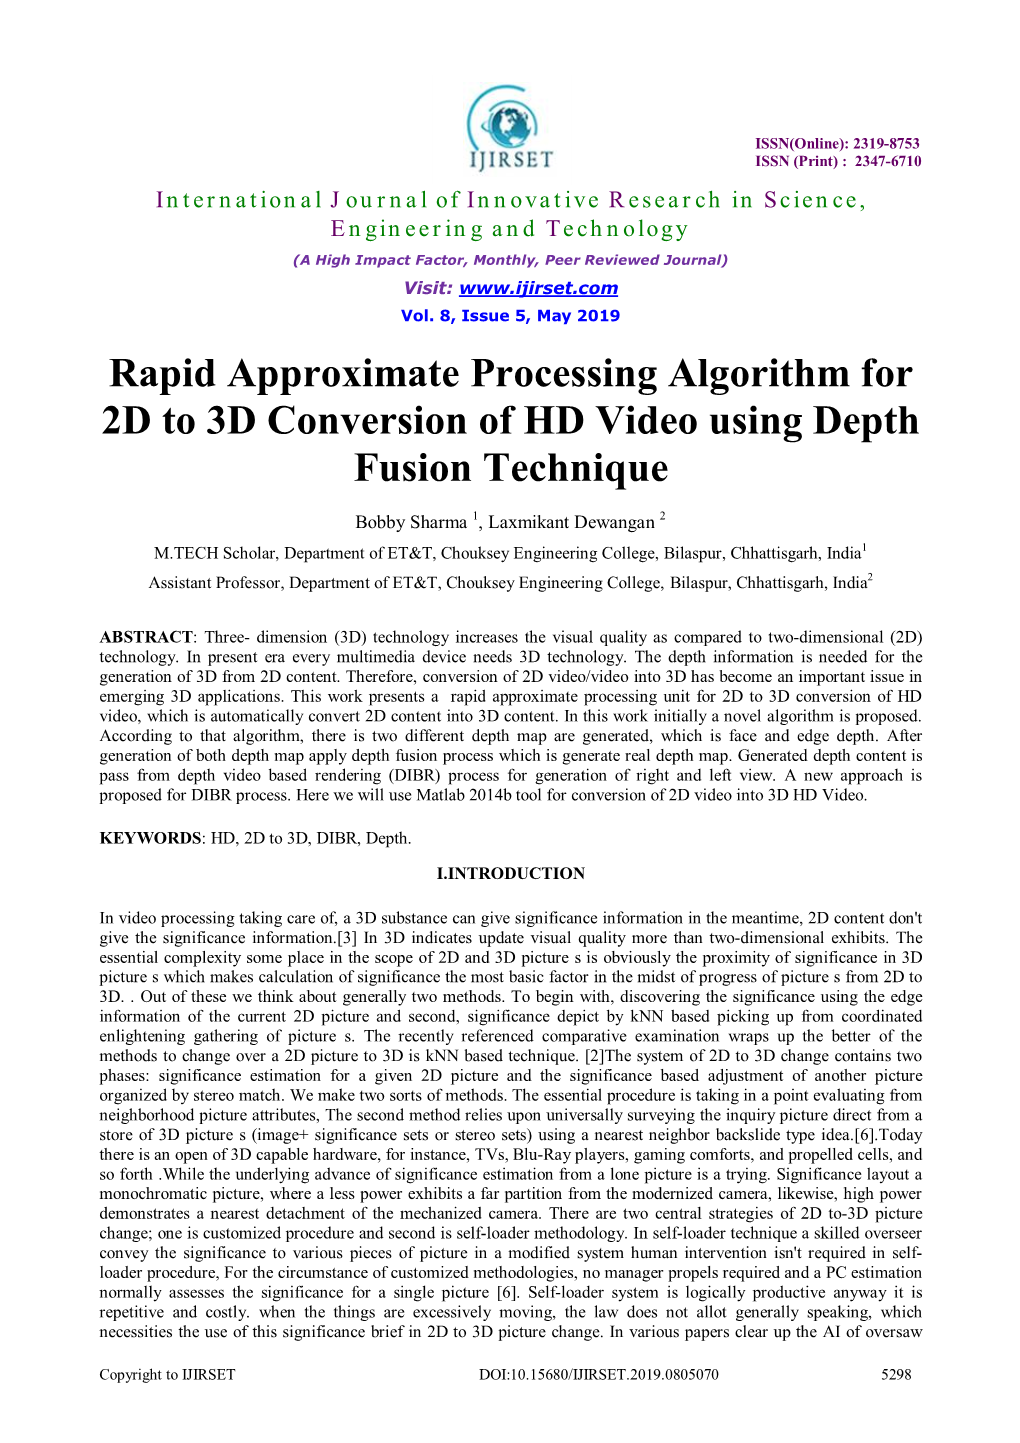 Rapid Approximate Processing Algorithm for 2D to 3D Conversion of HD Video Using Depth Fusion Technique